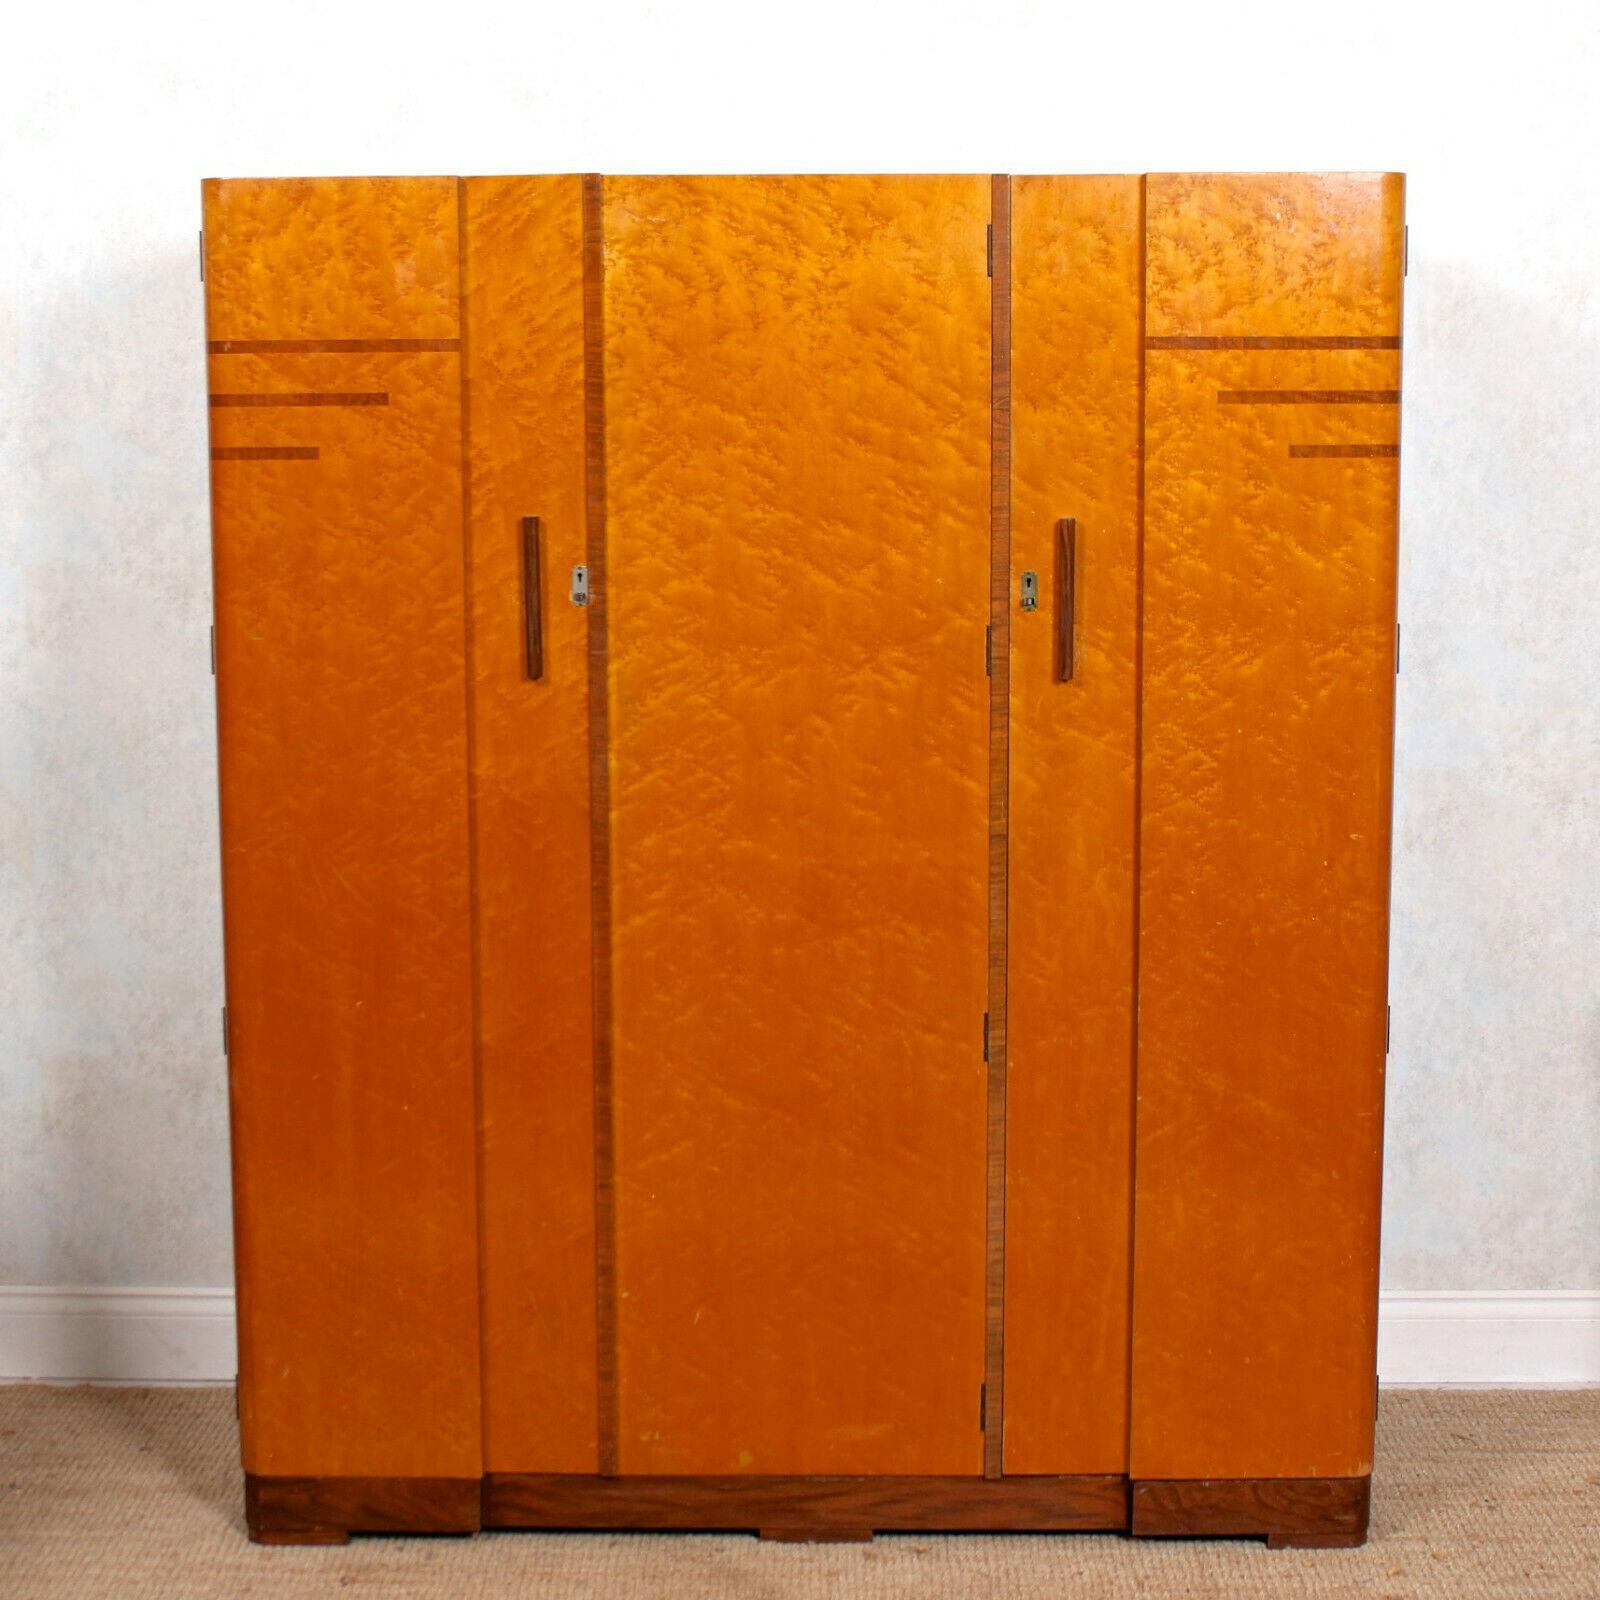 A fine quality Art Deco bird’s-eye maple compactum wardrobe.
The inlaid doors mounted with good handles and enclosed a fitted interior comprising hanging rails, hooks, shelving, glazed cupboard, tray and drawers mounted with good brass inset